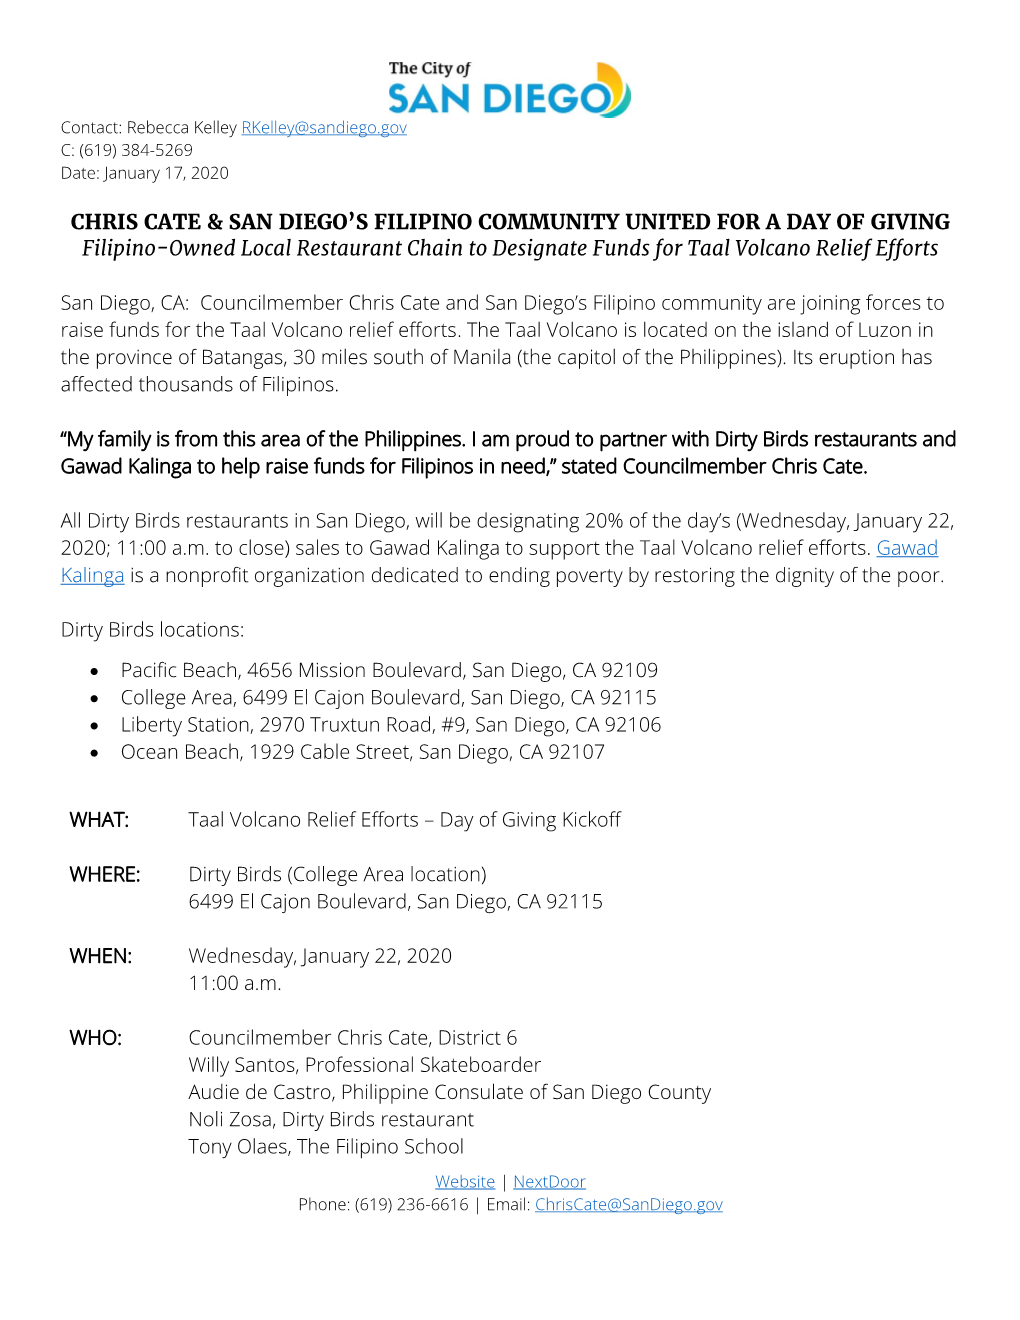 Chris Cate & San Diego's Filipino Community United for a Day of Giving